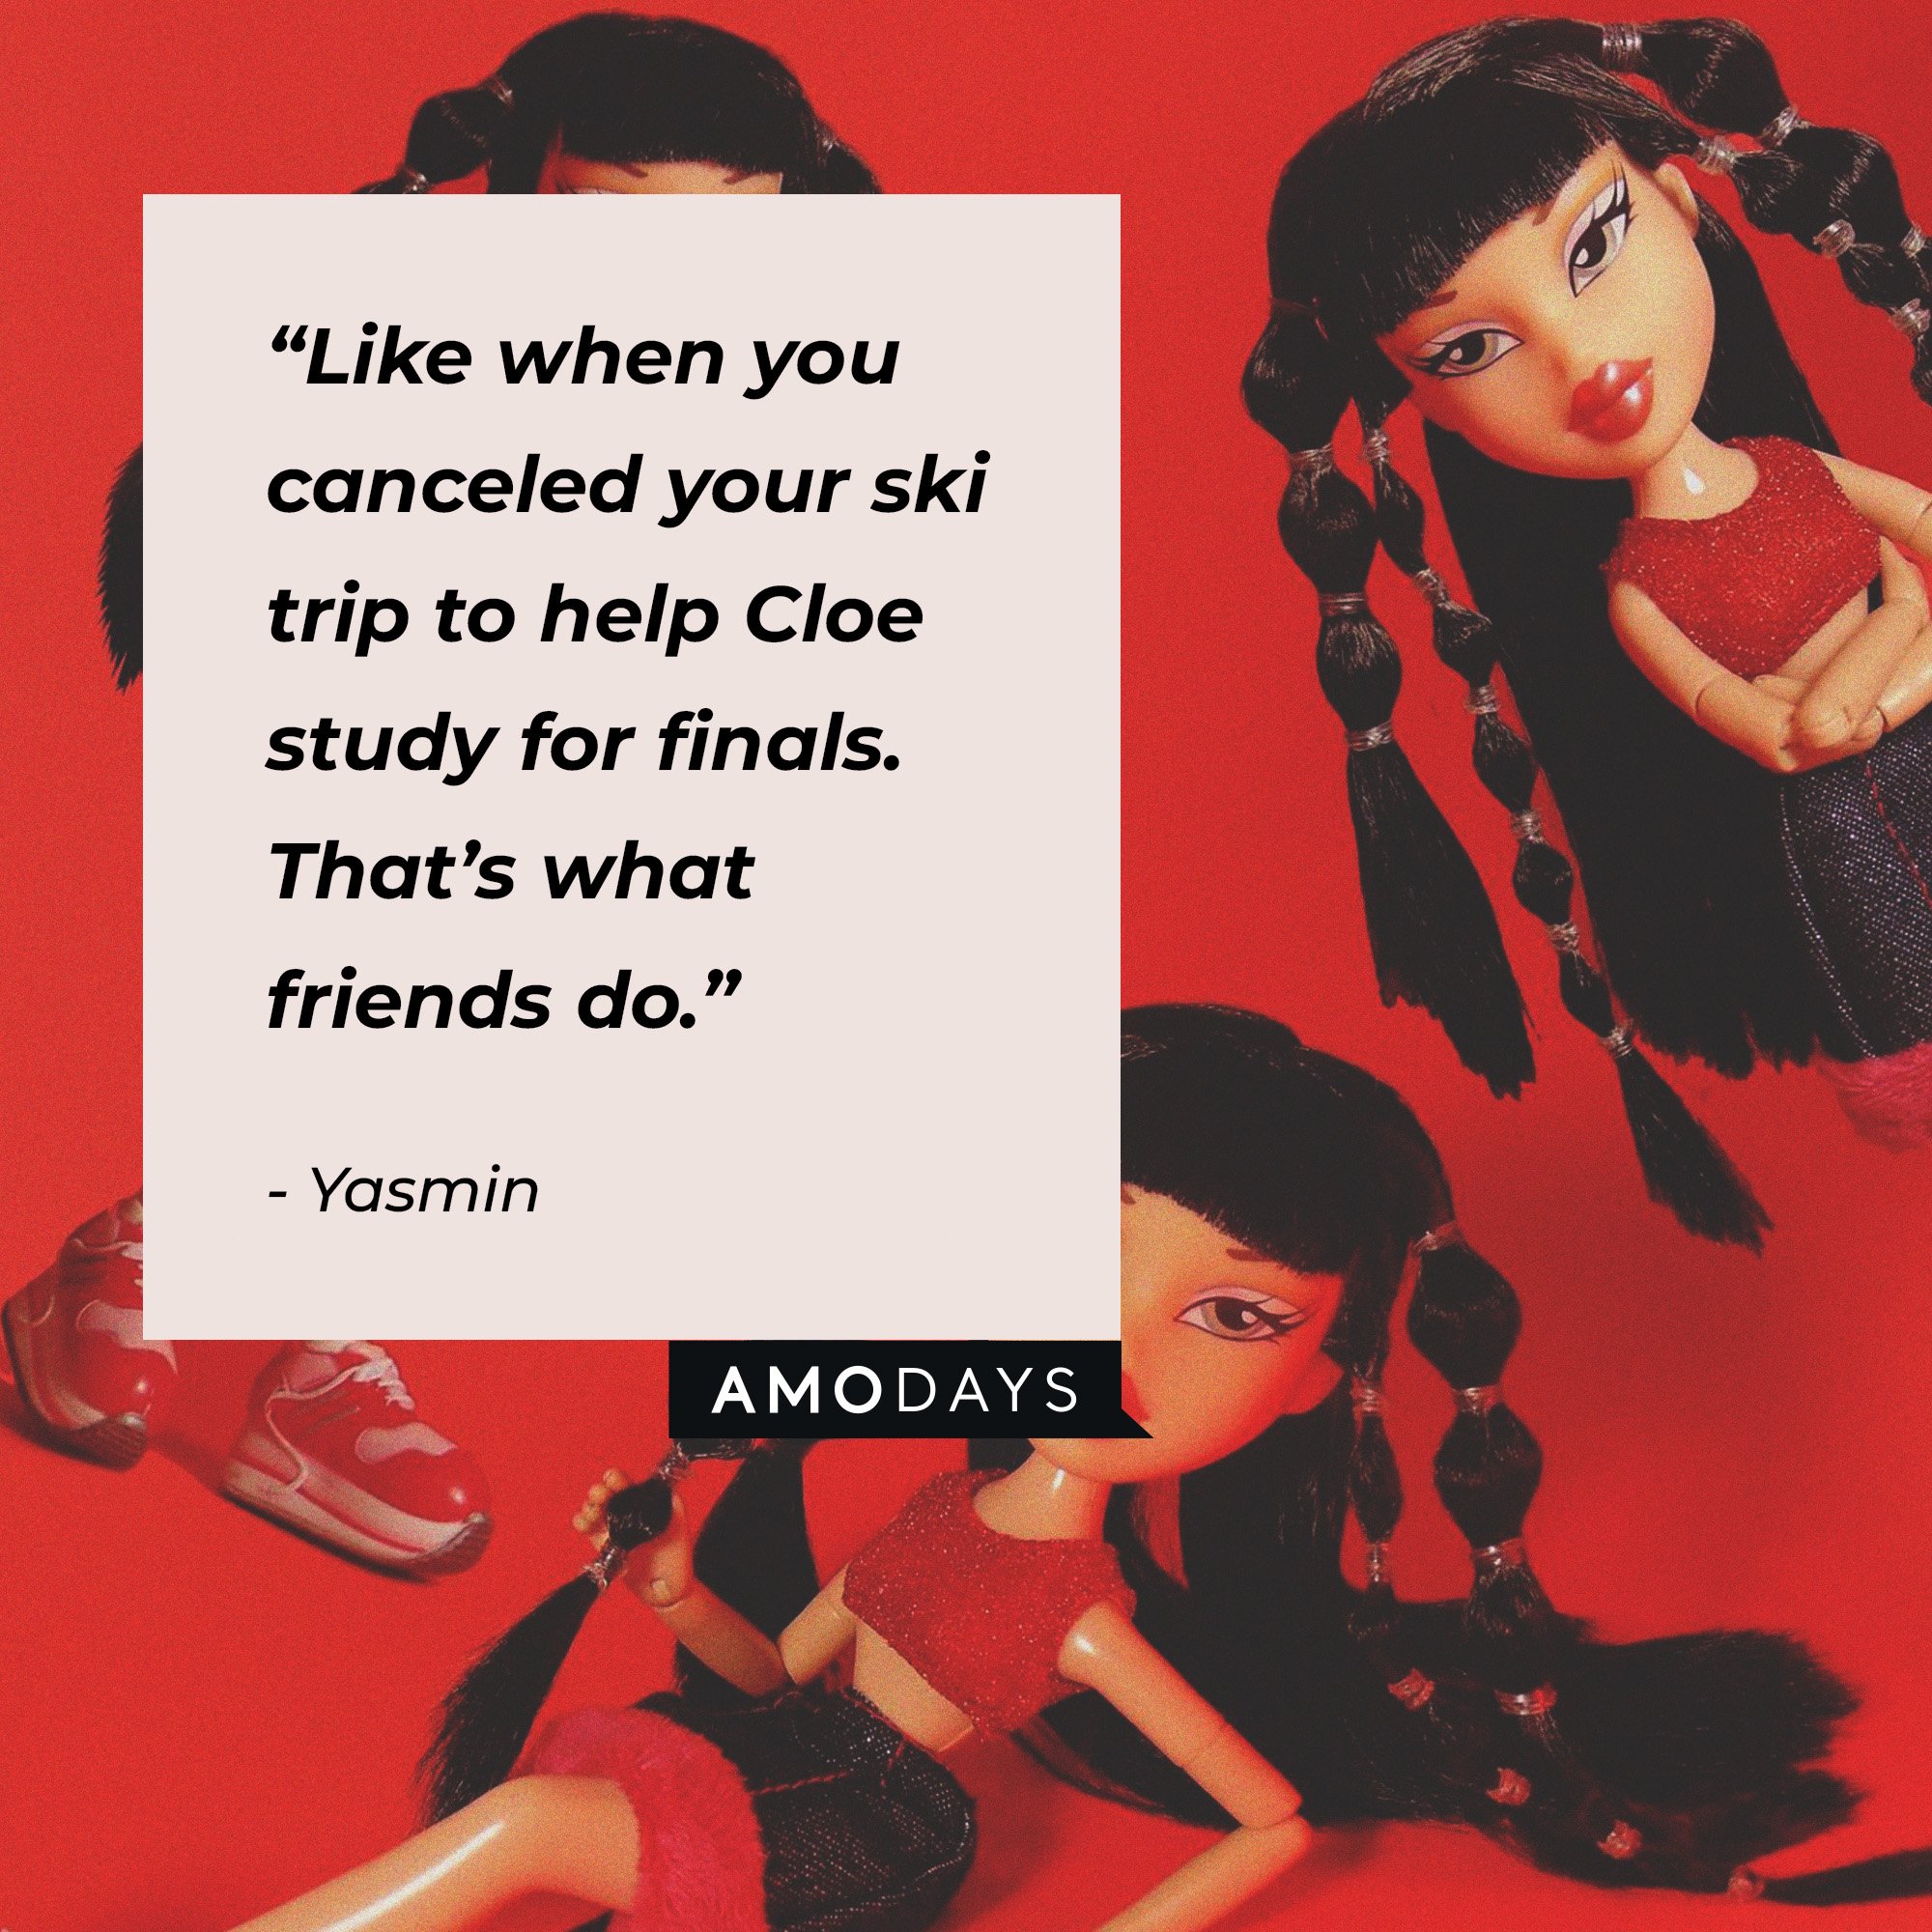 Yasmin's quote: “Like when you canceled your ski trip to help Cloe study for finals. That’s what friends do.” | Image: AmoDays